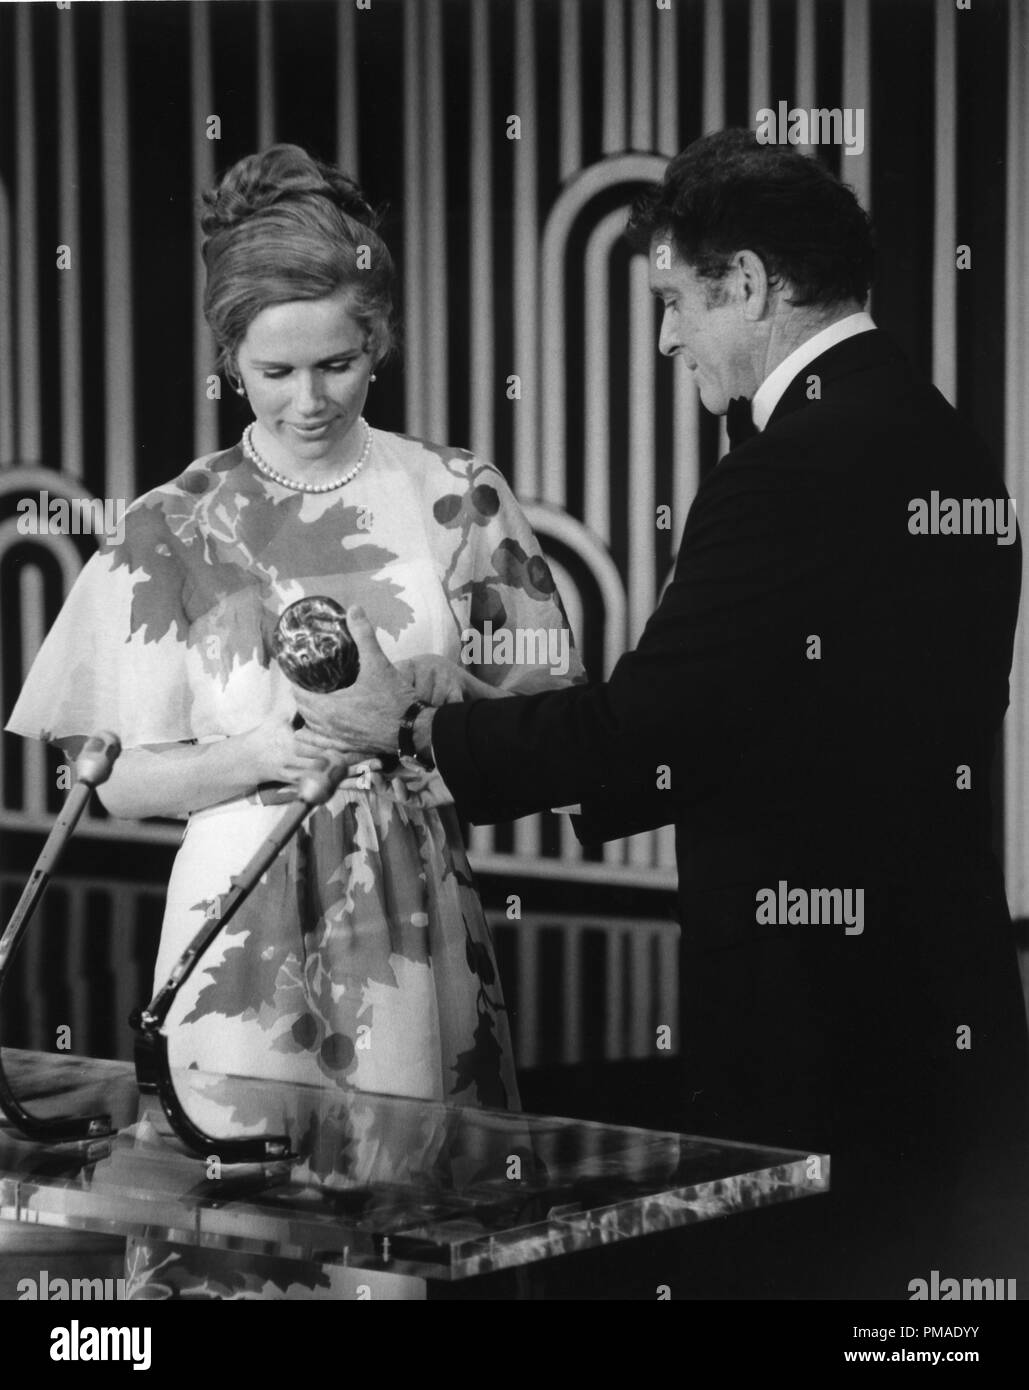 Burt Lancaster, Liv Ulman at the 43rd Annual Academy Awards, 1971  File Reference # 32509 457THA Stock Photo